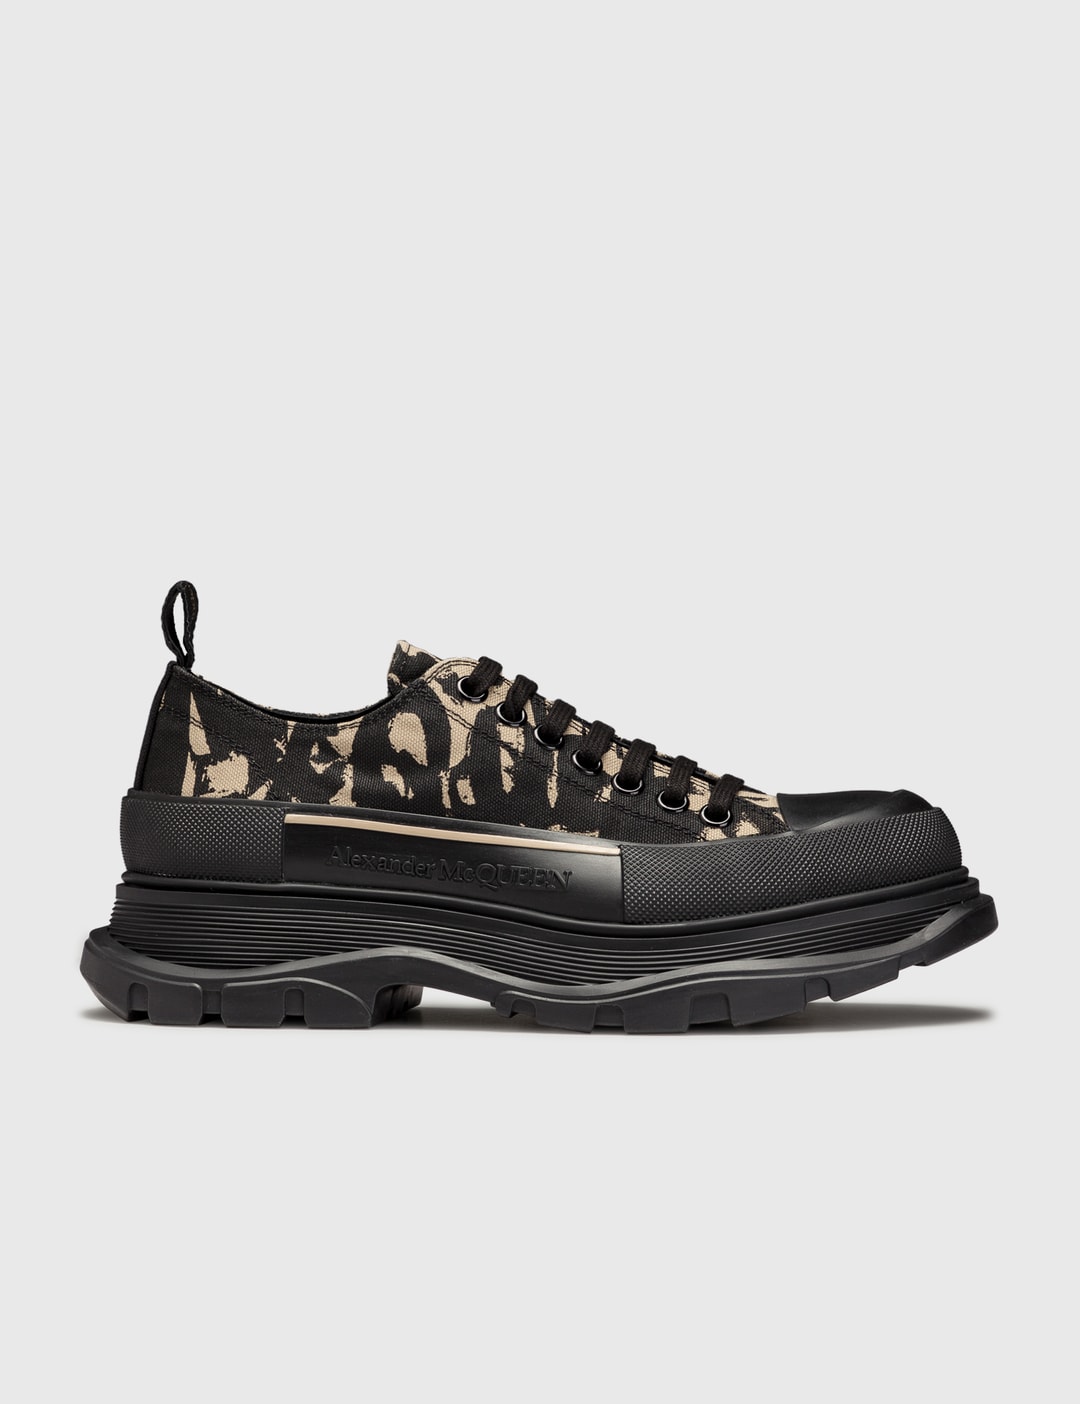 Alexander McQueen - McQueen Graffiti Tread Slick Lace-up Sneakers | HBX -  Globally Curated Fashion and Lifestyle by Hypebeast